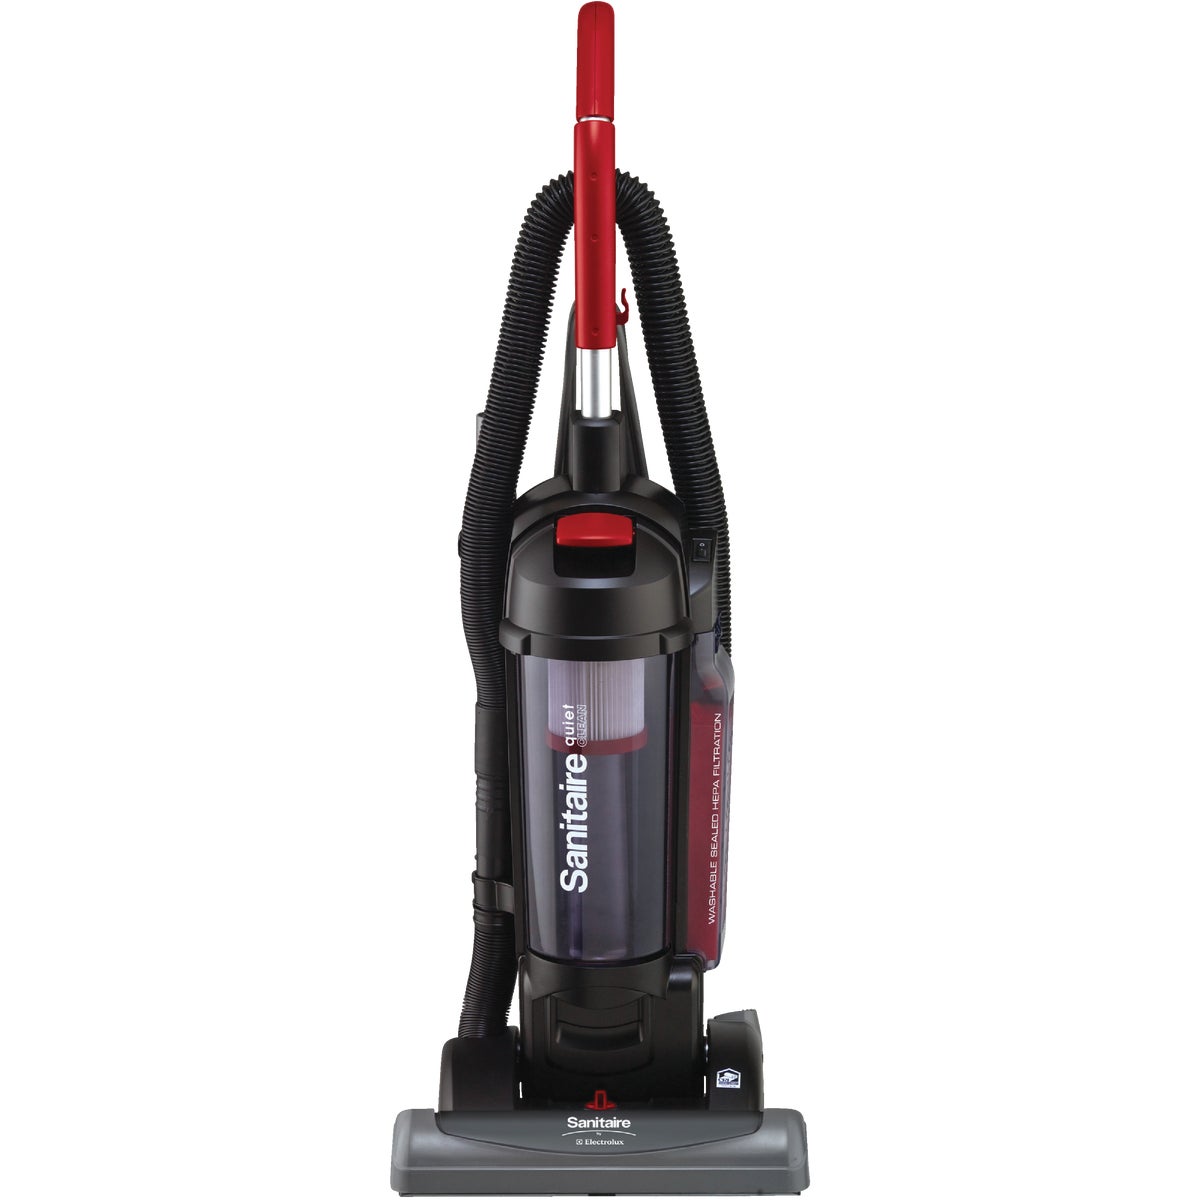 Sanitaire Force QuietClean 15 In. Commercial Bagless Upright Vacuum Cleaner